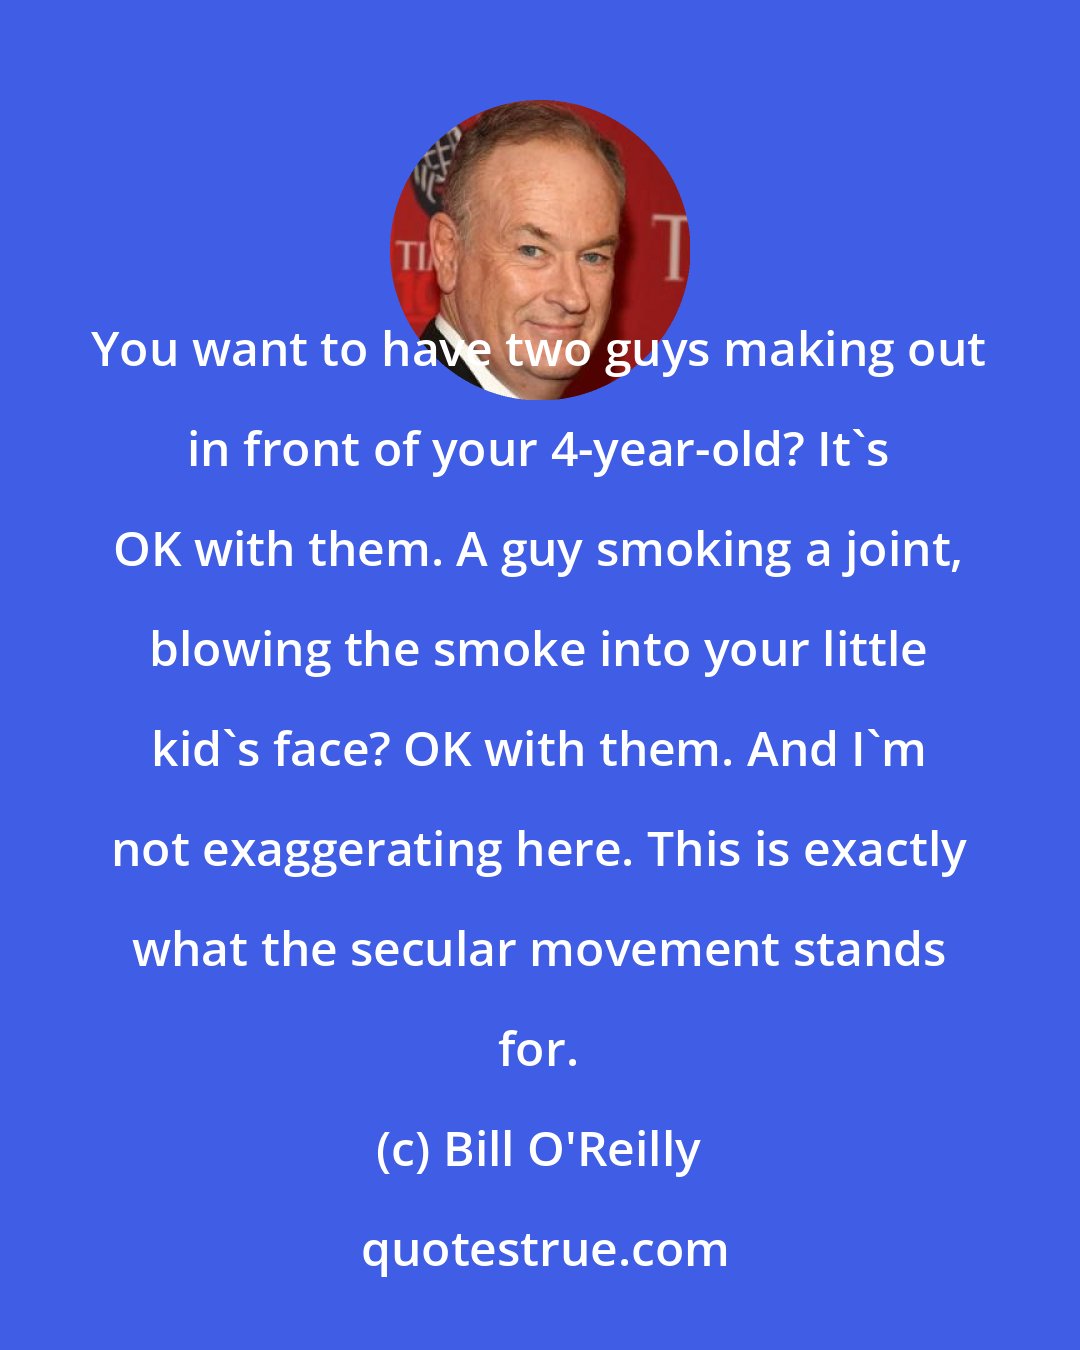 Bill O'Reilly: You want to have two guys making out in front of your 4-year-old? It's OK with them. A guy smoking a joint, blowing the smoke into your little kid's face? OK with them. And I'm not exaggerating here. This is exactly what the secular movement stands for.